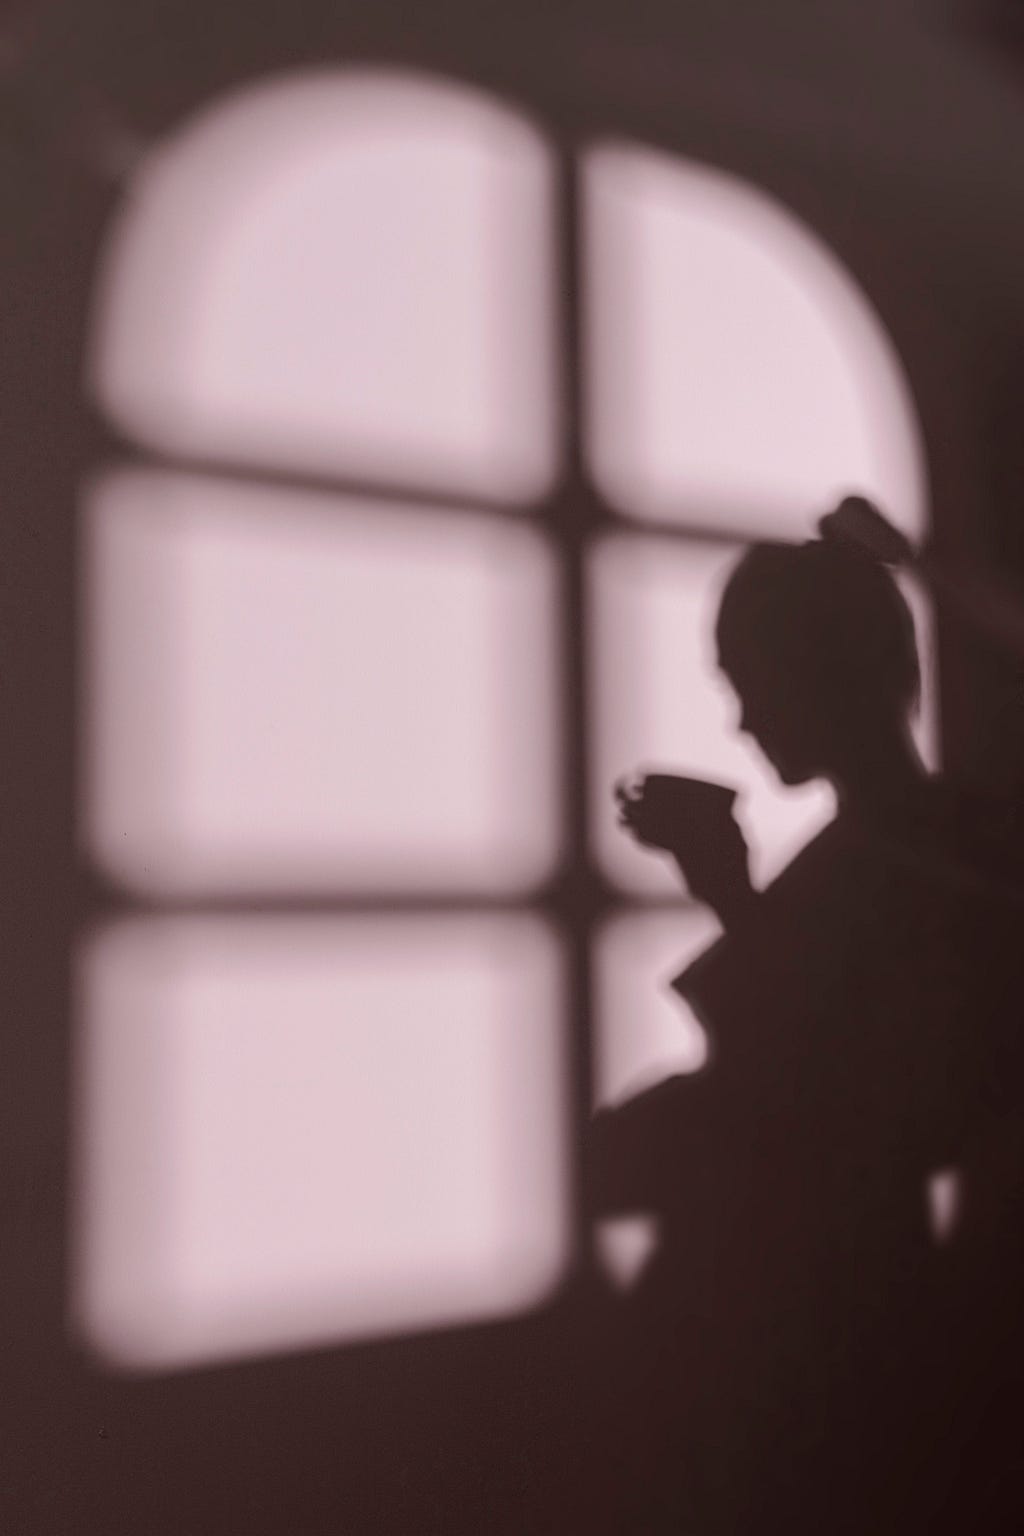 Image by <a href=”https://www.freepik.com/free-photo/silhouette-young-woman-home-with-window-shadows_12706998.htm#query=broken%20love%20aesthetic&position=24&from_view=search&track=ais&uuid=8427226e-7bda-4b28-a7a4-c5cd17625f43">Freepik</a>